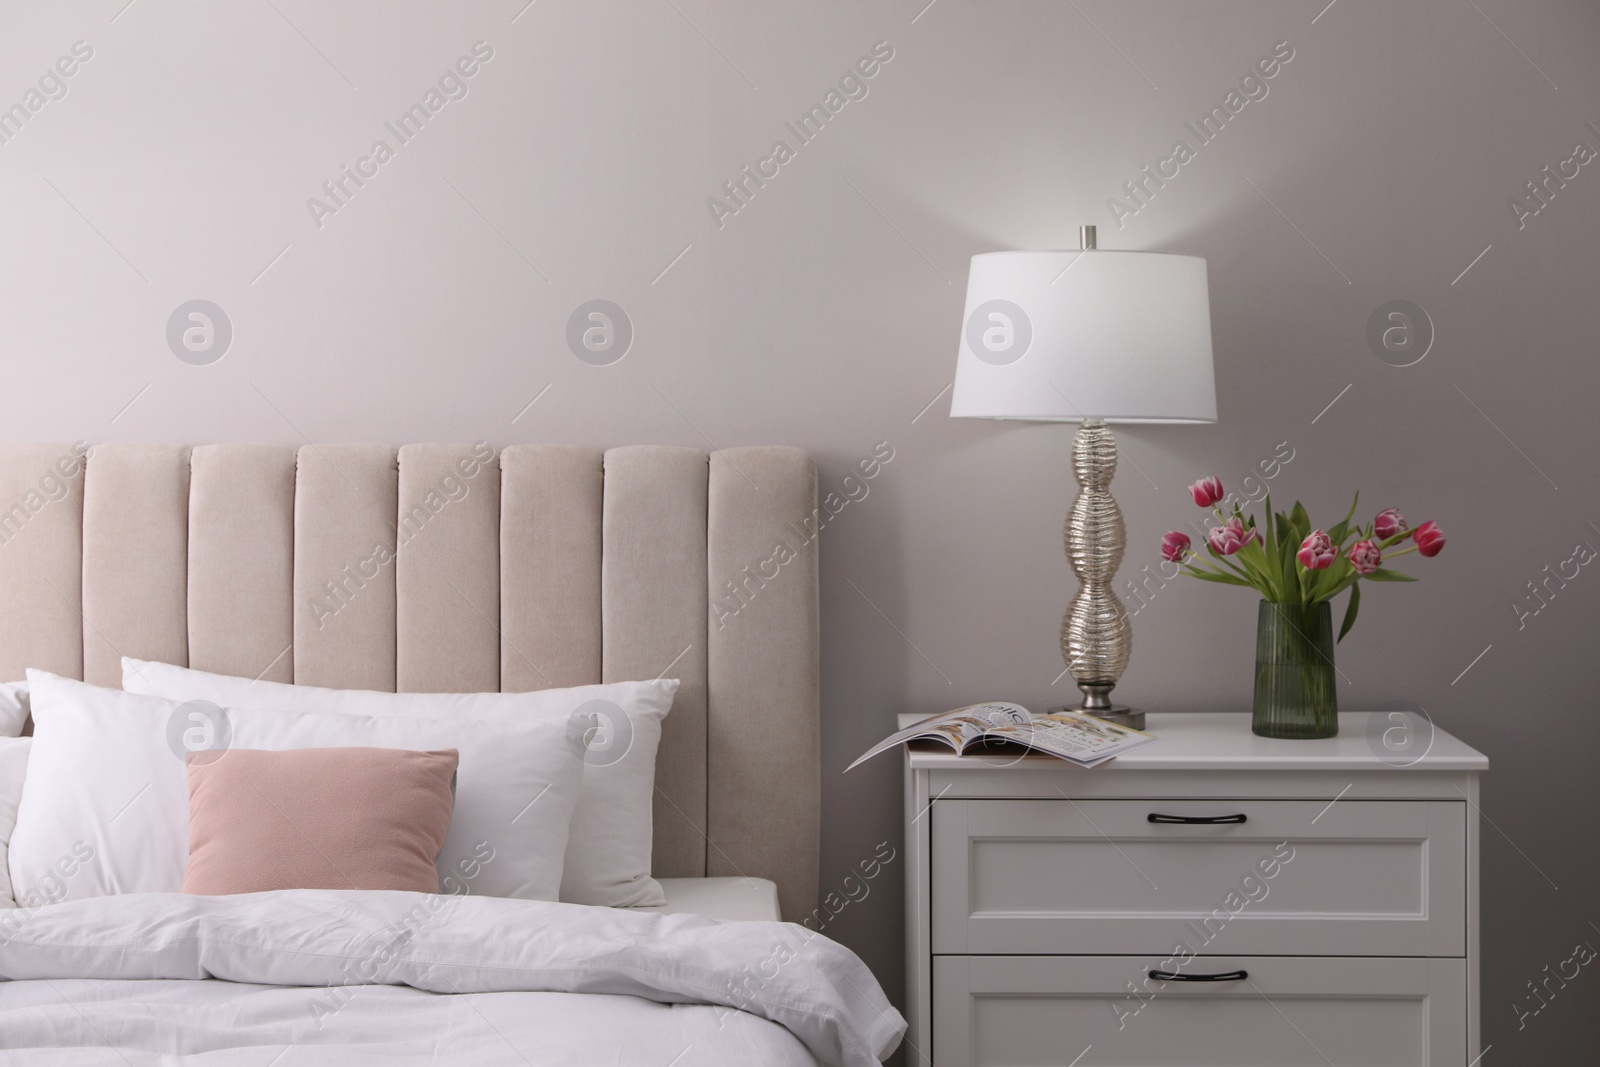 Photo of Stylish lamp, flowers and magazine on bedside table indoors. Bedroom interior elements